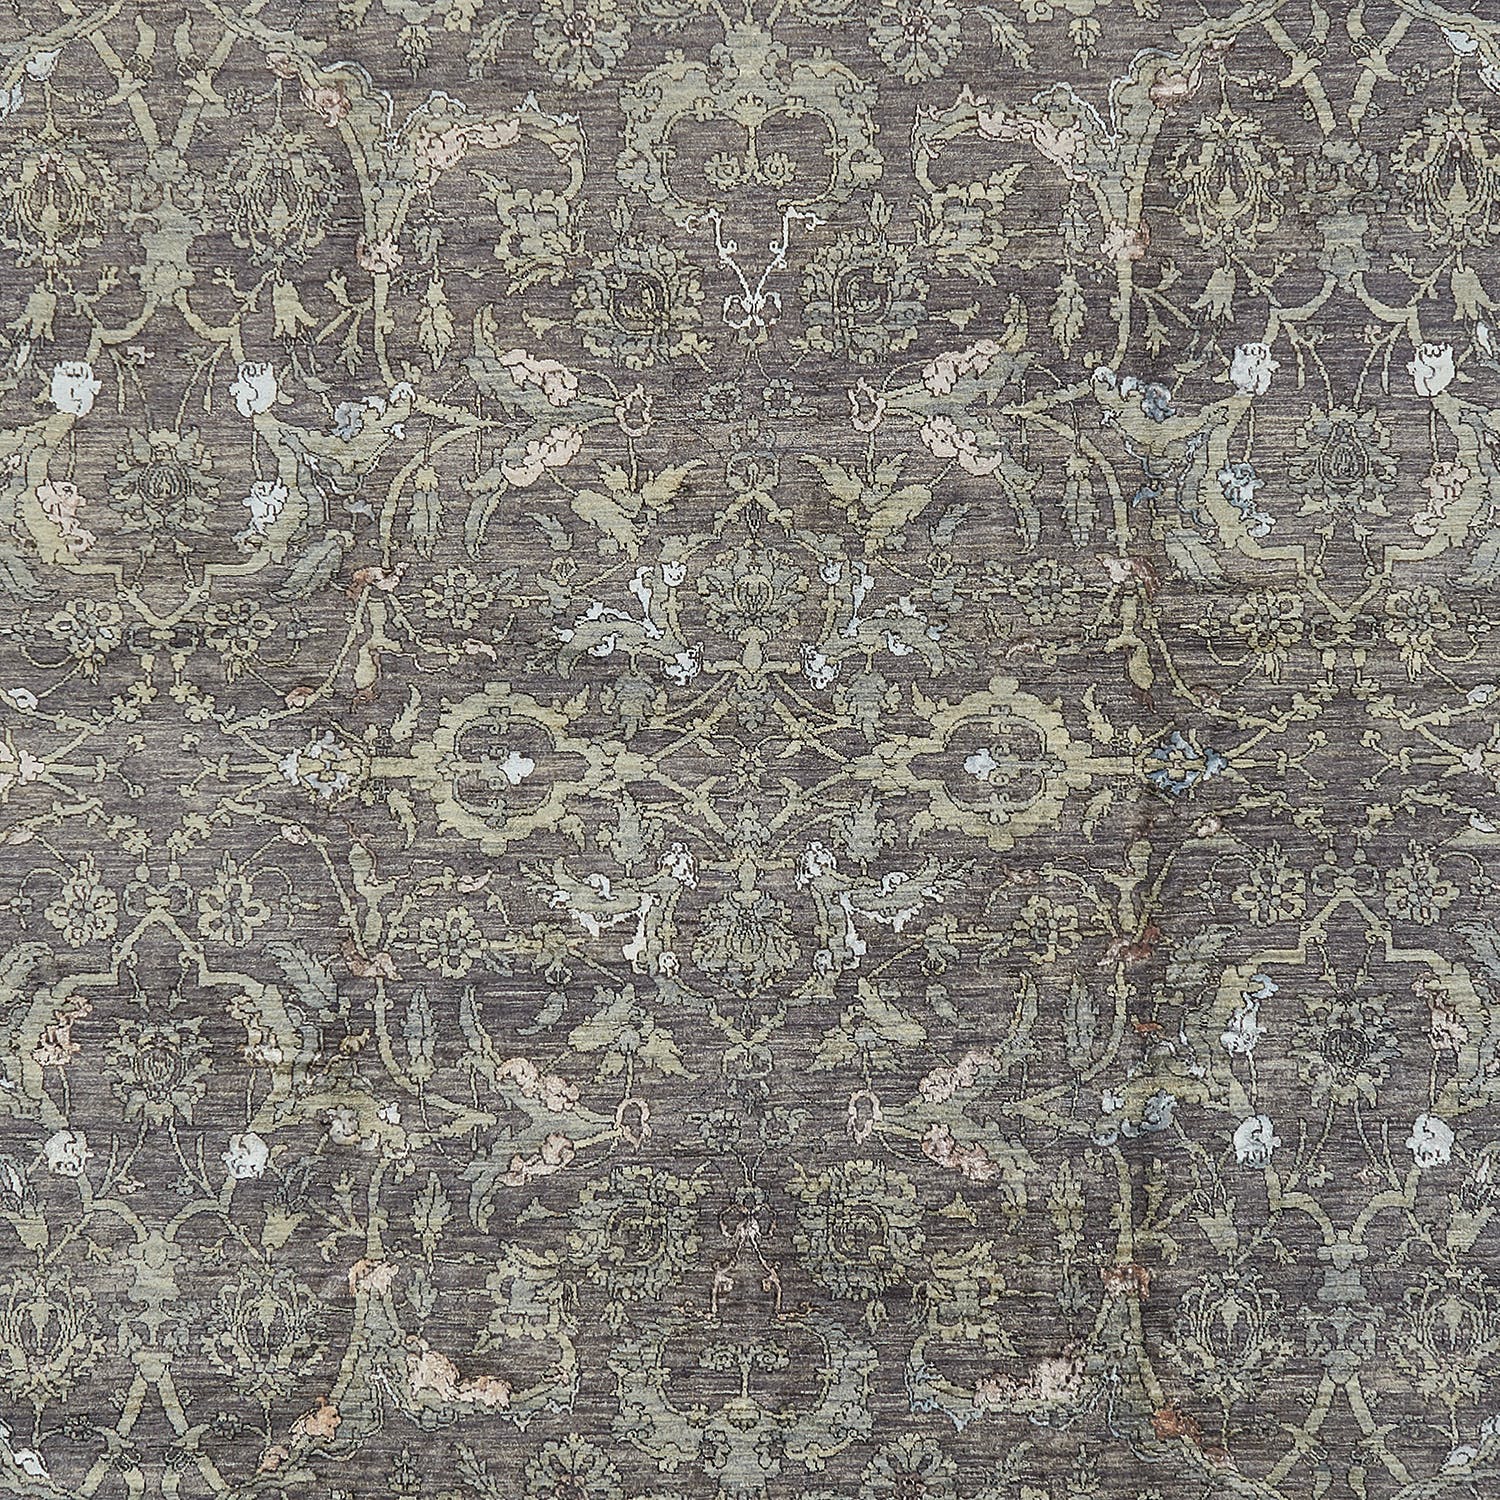 Antique textile showcasing intricate vintage patterns in muted shades.